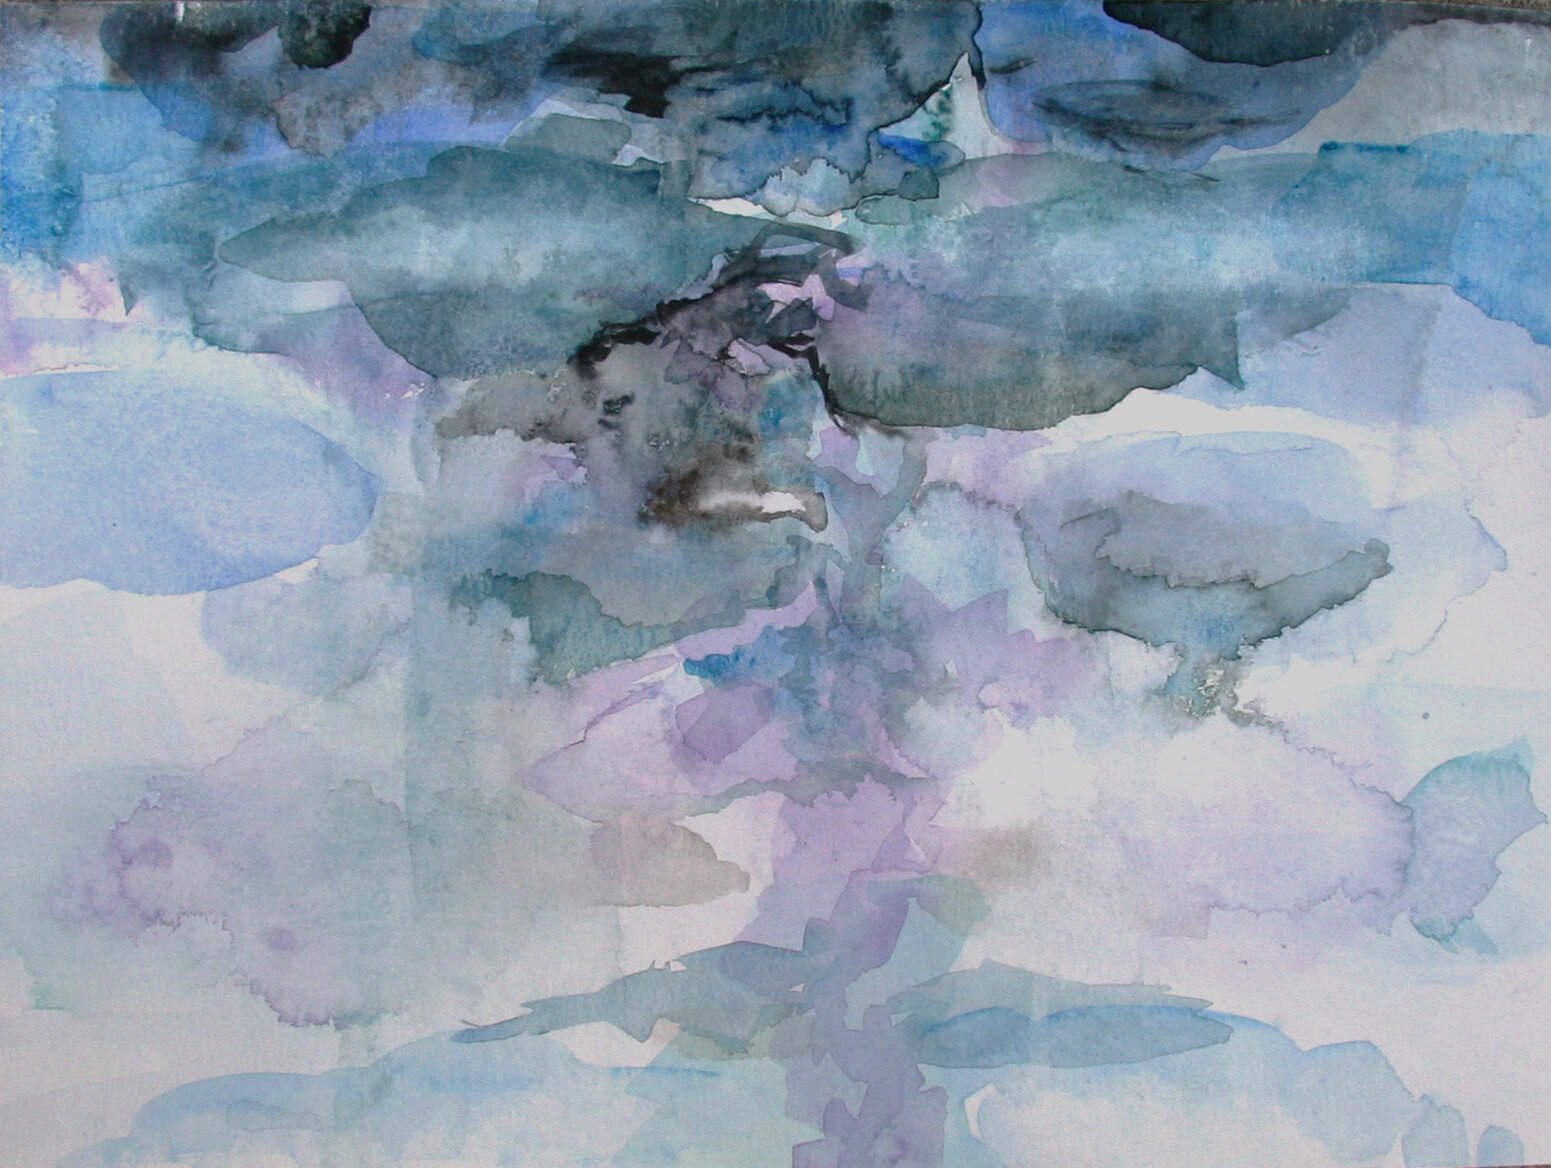  Carol Warner  “Sparks from each eye come from different dreams” , 2020  Watercolor on paper 9 x 12 inches  